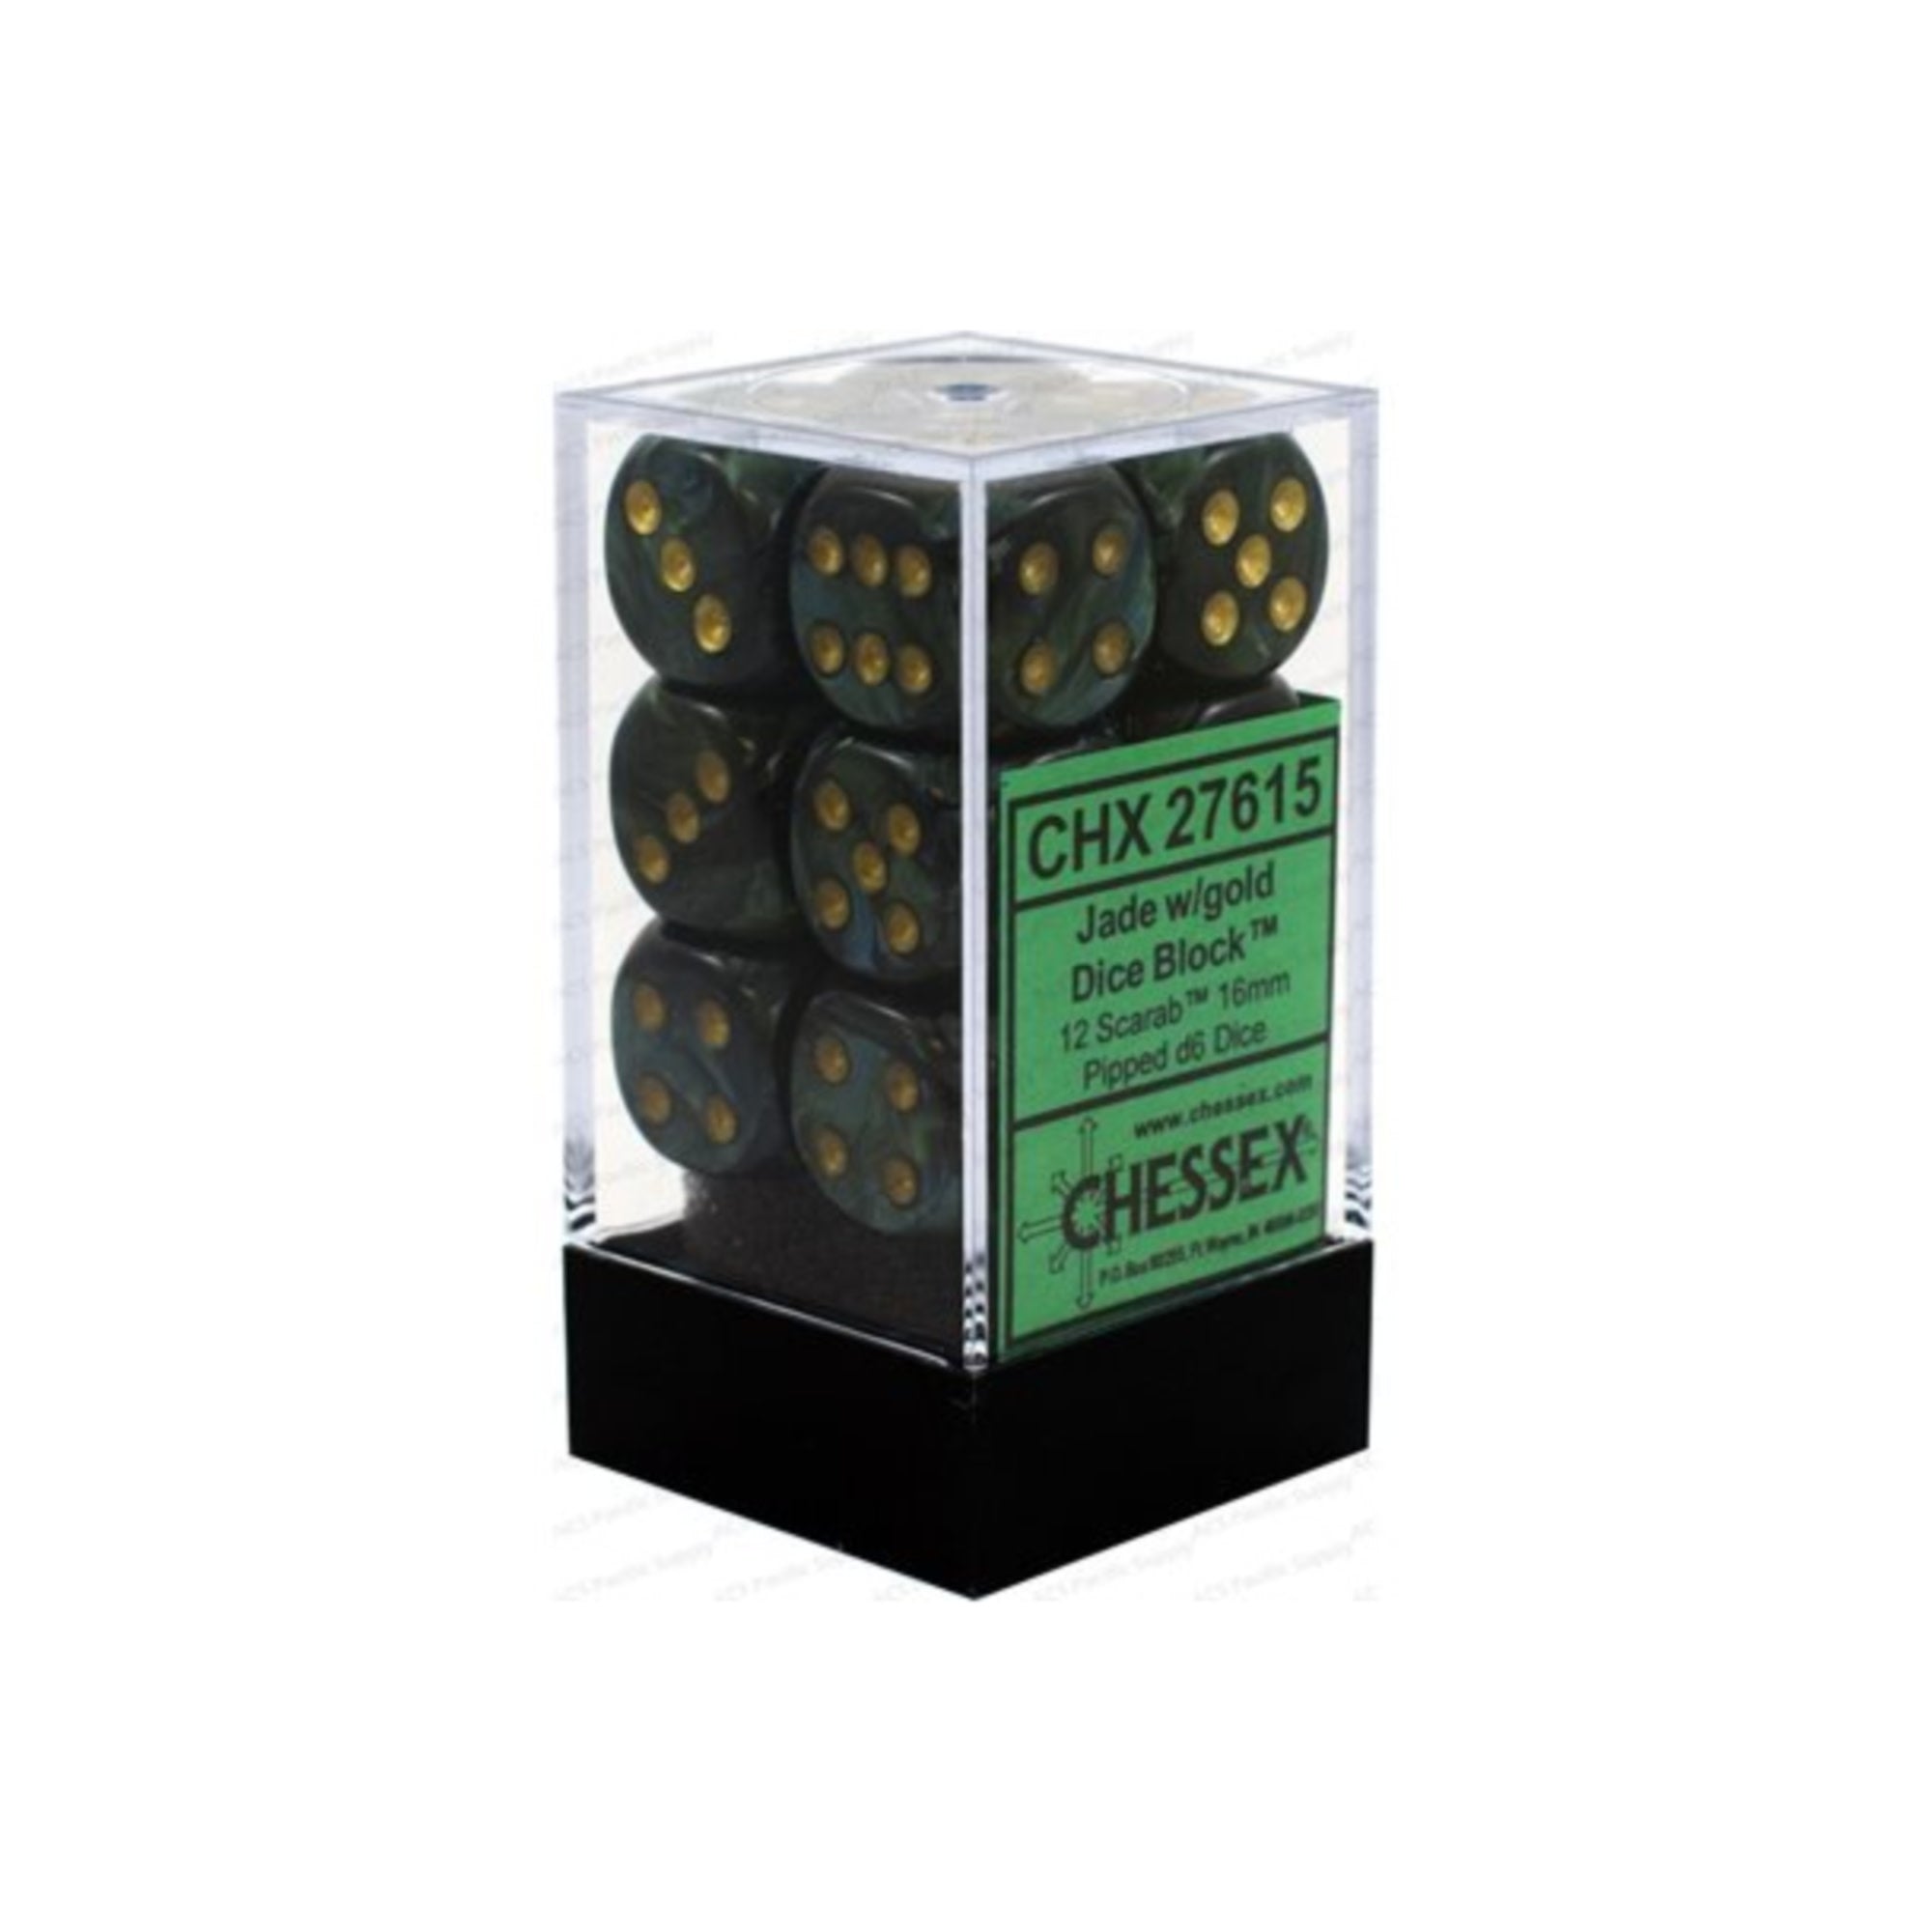 CHESSEX Scarab 12D6 Jade/Gold 16MM (CHX27615) | Eastridge Sports Cards & Games